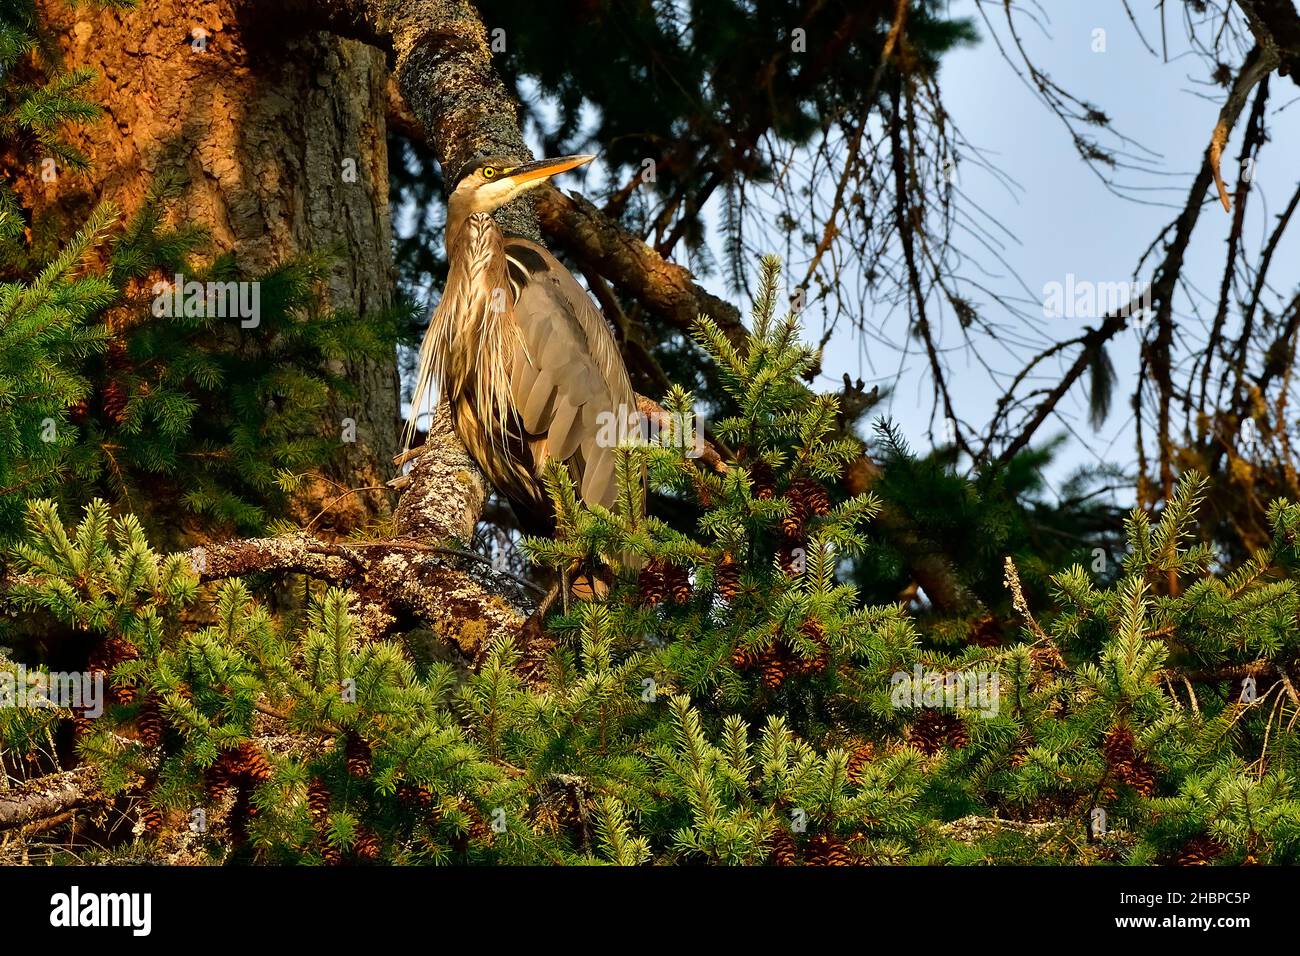 An adult Great Blue Heron 'Ardea herodias', perched in a tall spruce tree on Vancouver Island in British Columbia Canada. Stock Photo